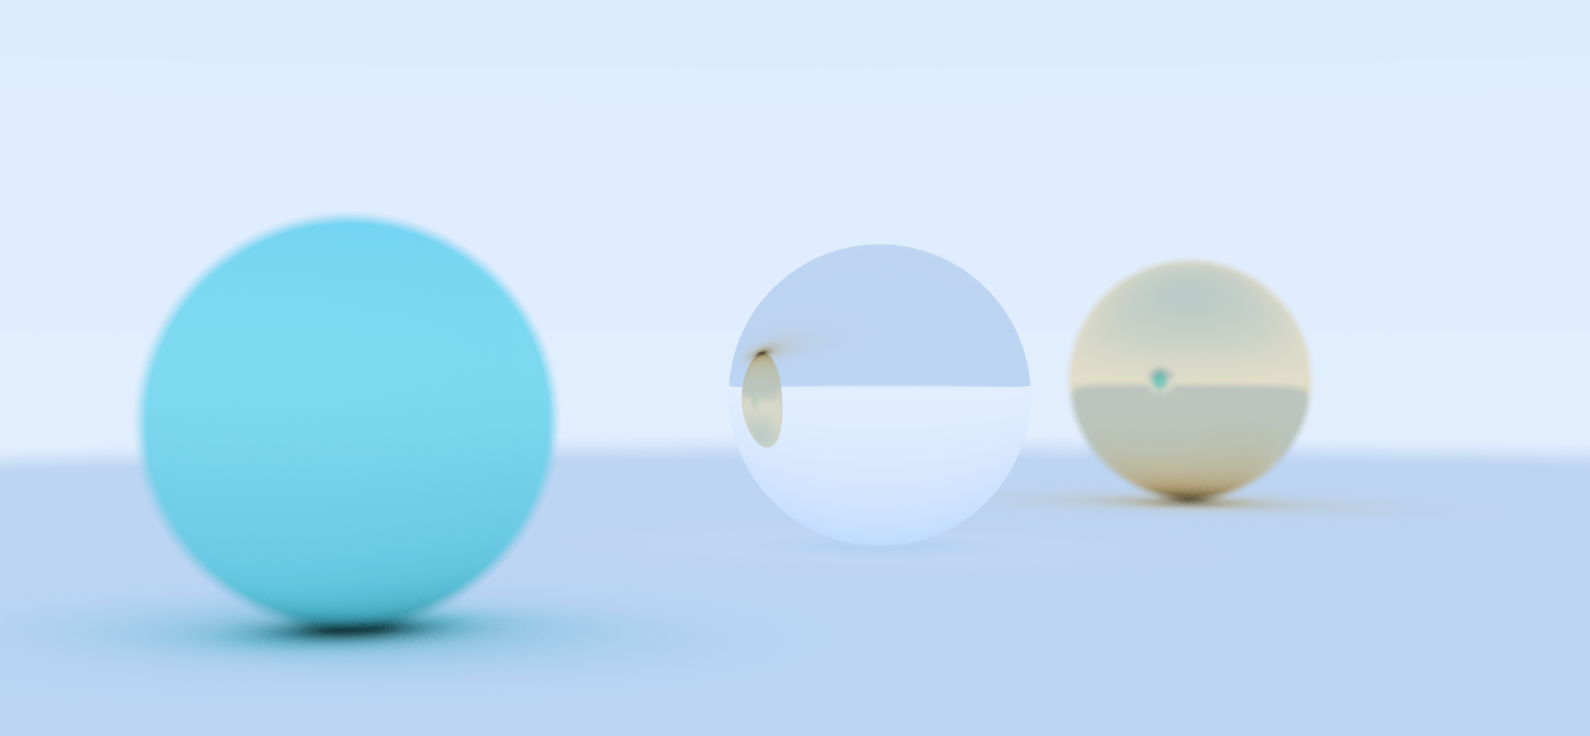 final raytraced image